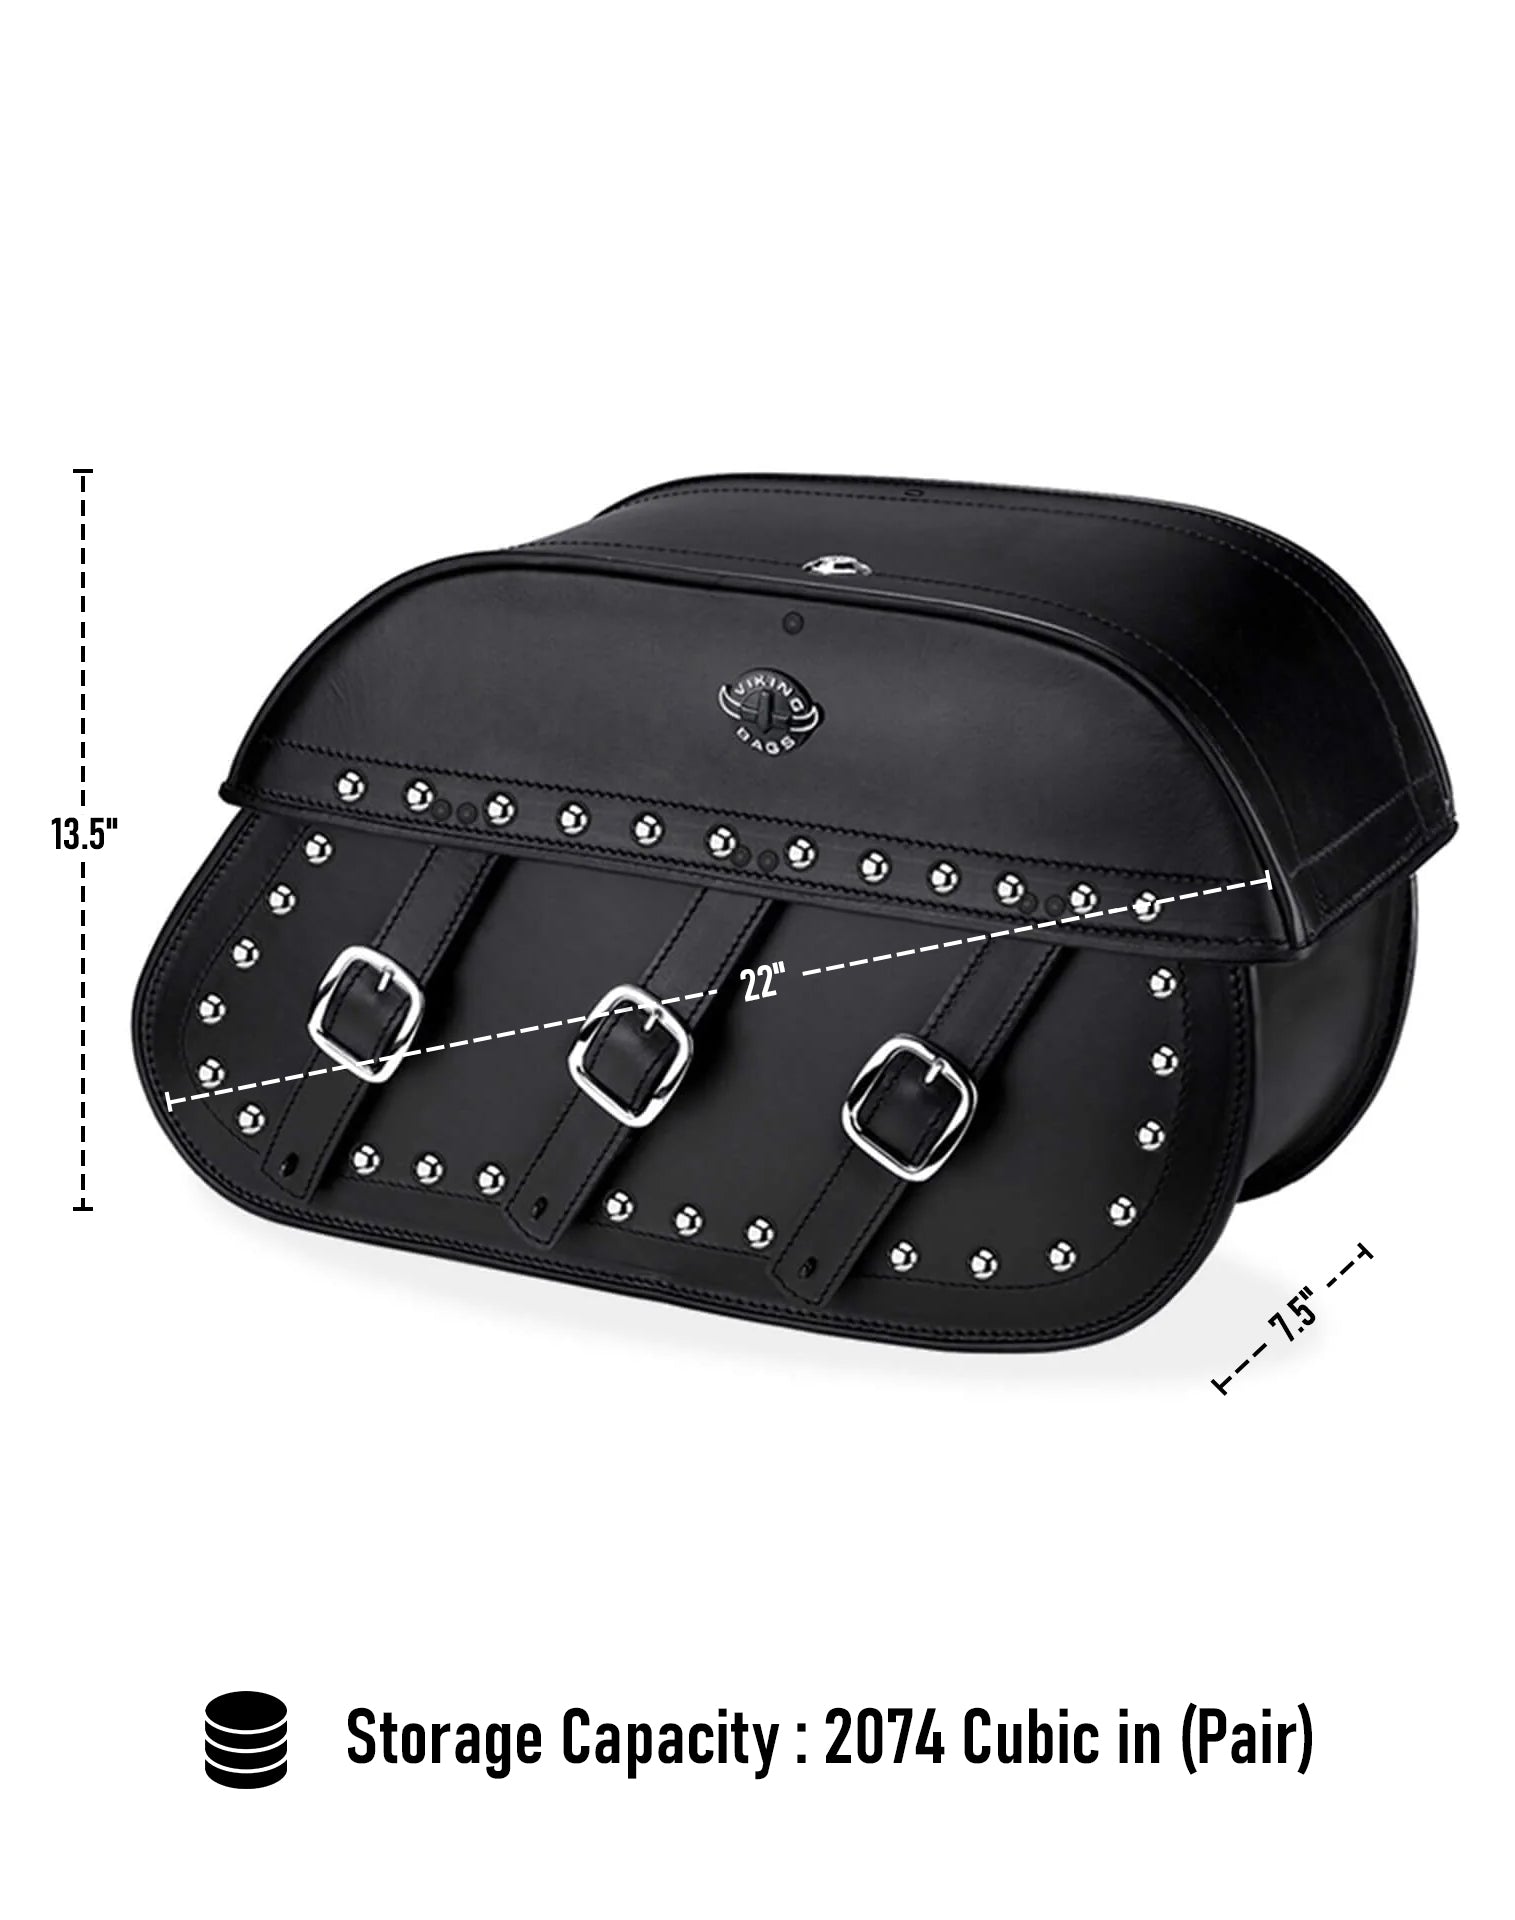 Viking Trianon Extra Large Victory Kingpin Studded Leather Motorcycle Saddlebags Can Store Your Ridings Gears